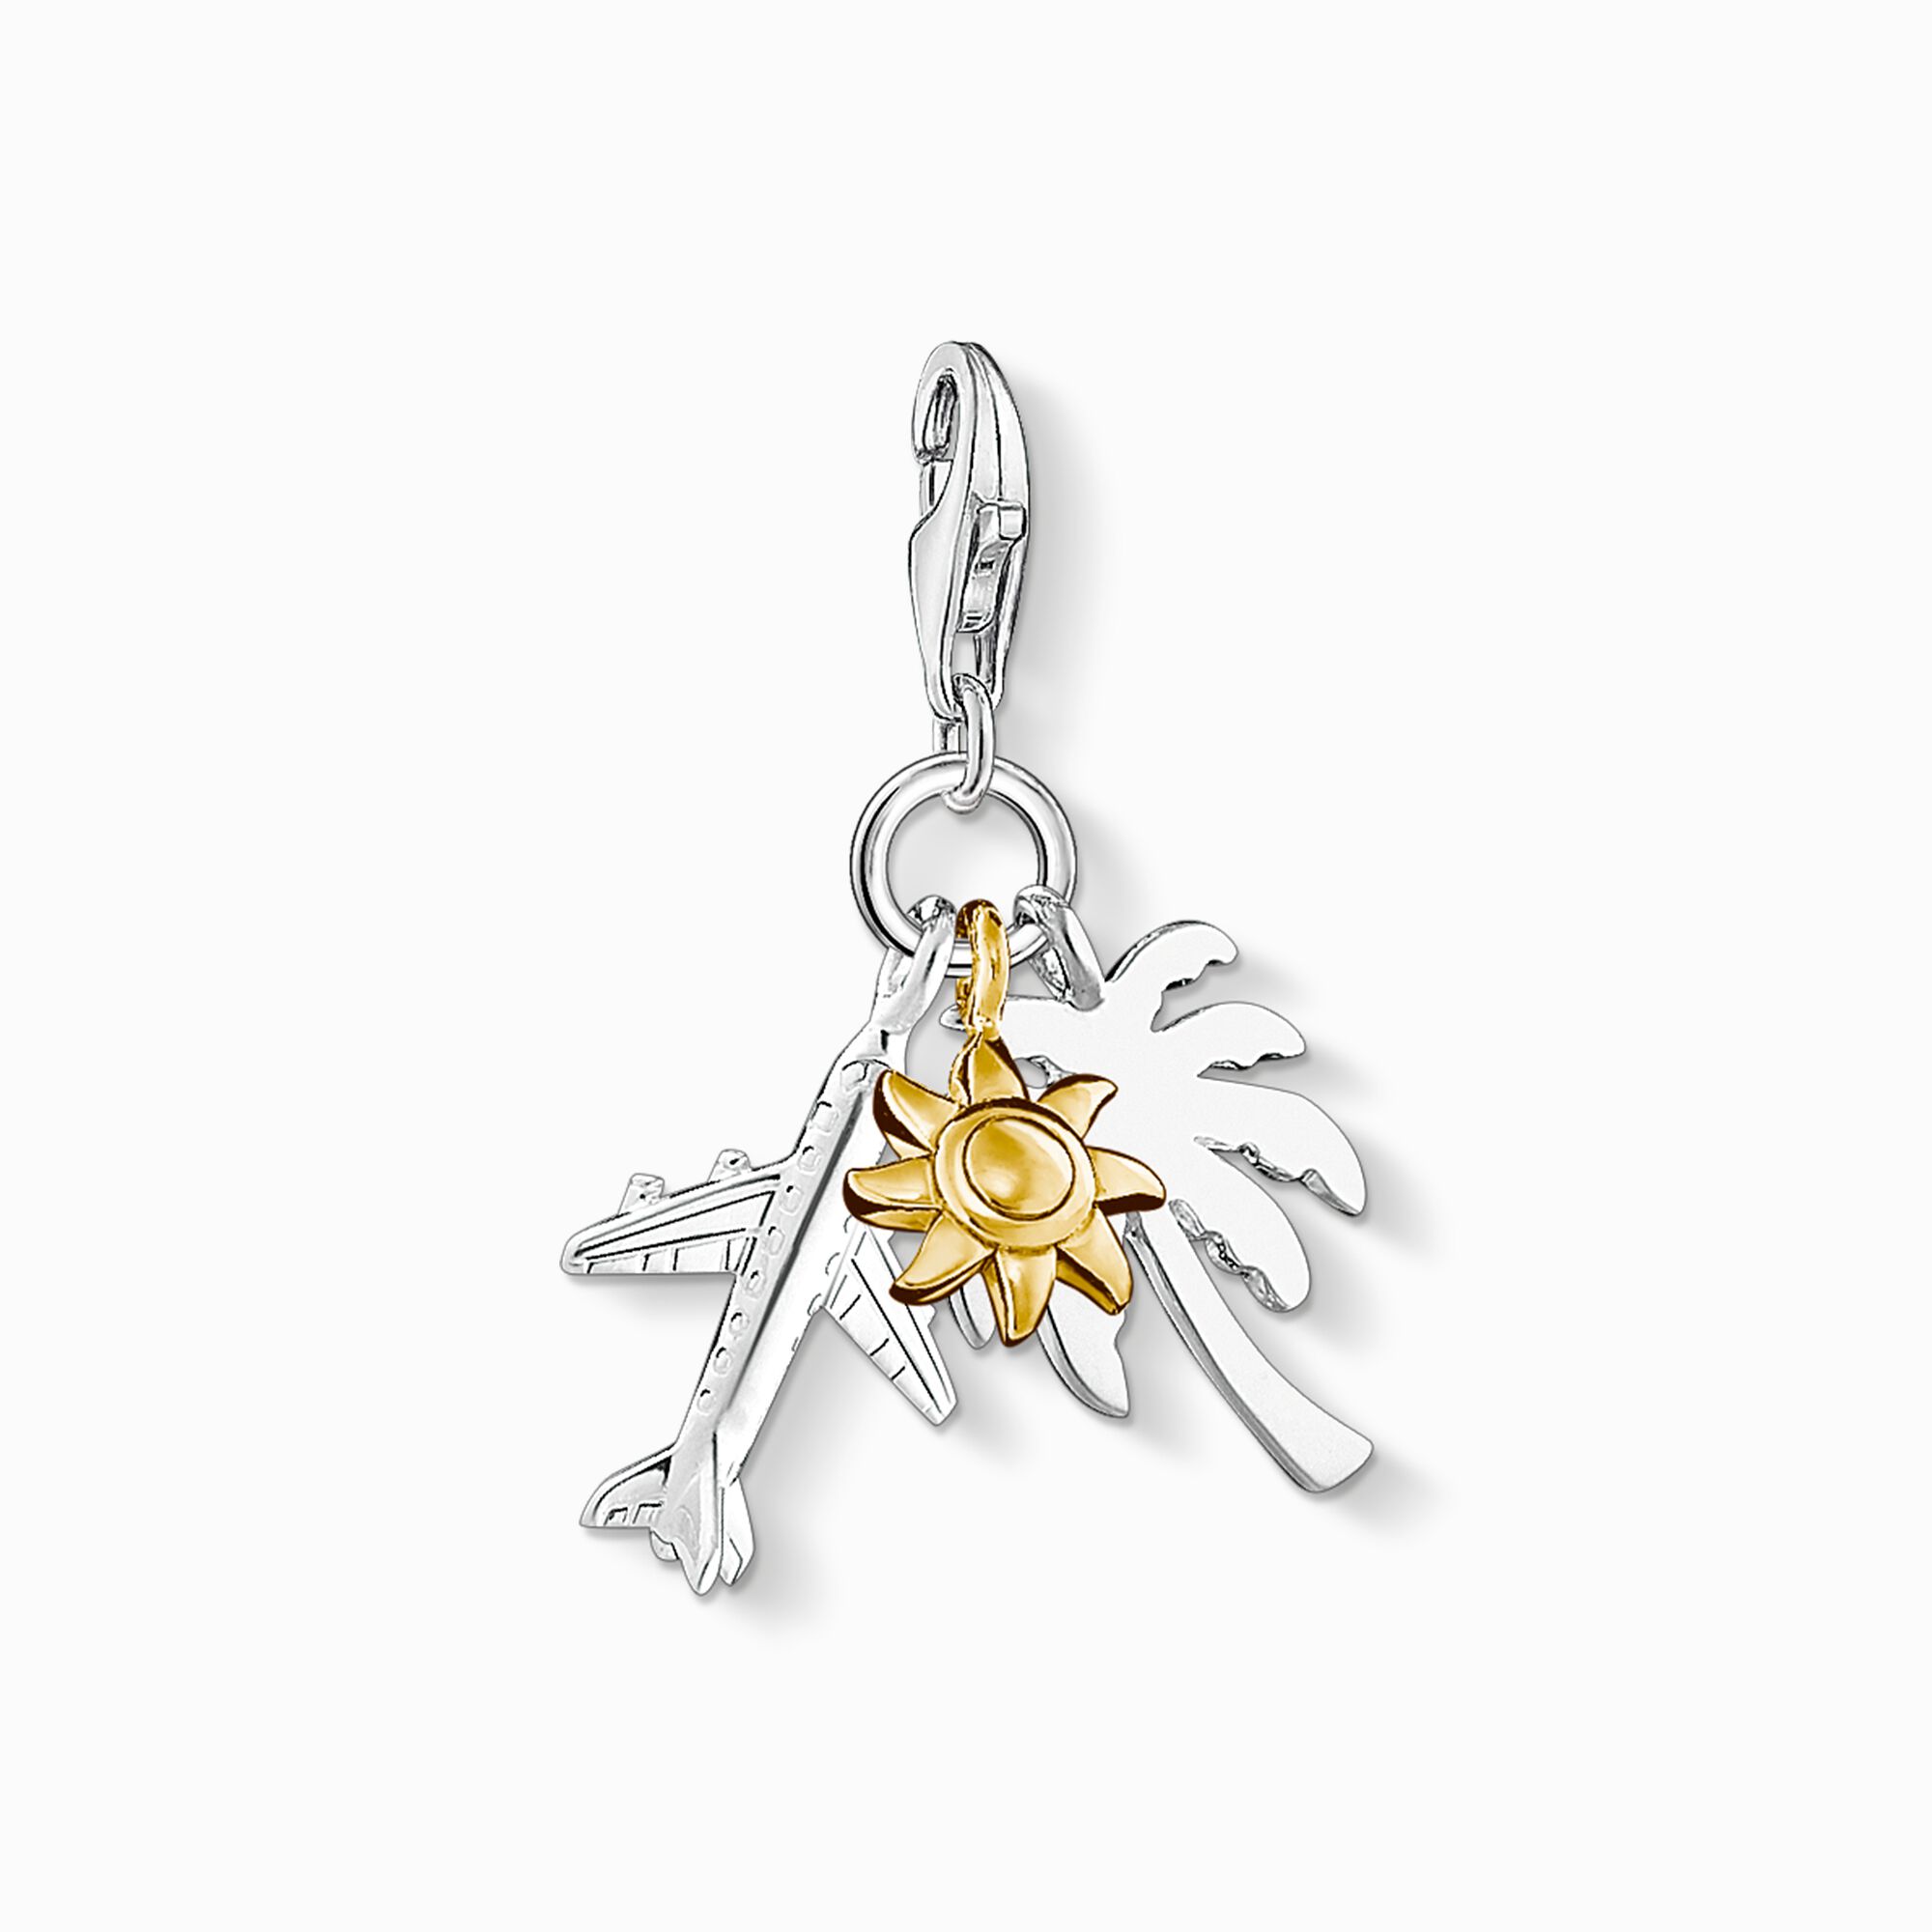 Charm pendant palm tree, sun, plane from the Charm Club collection in the THOMAS SABO online store